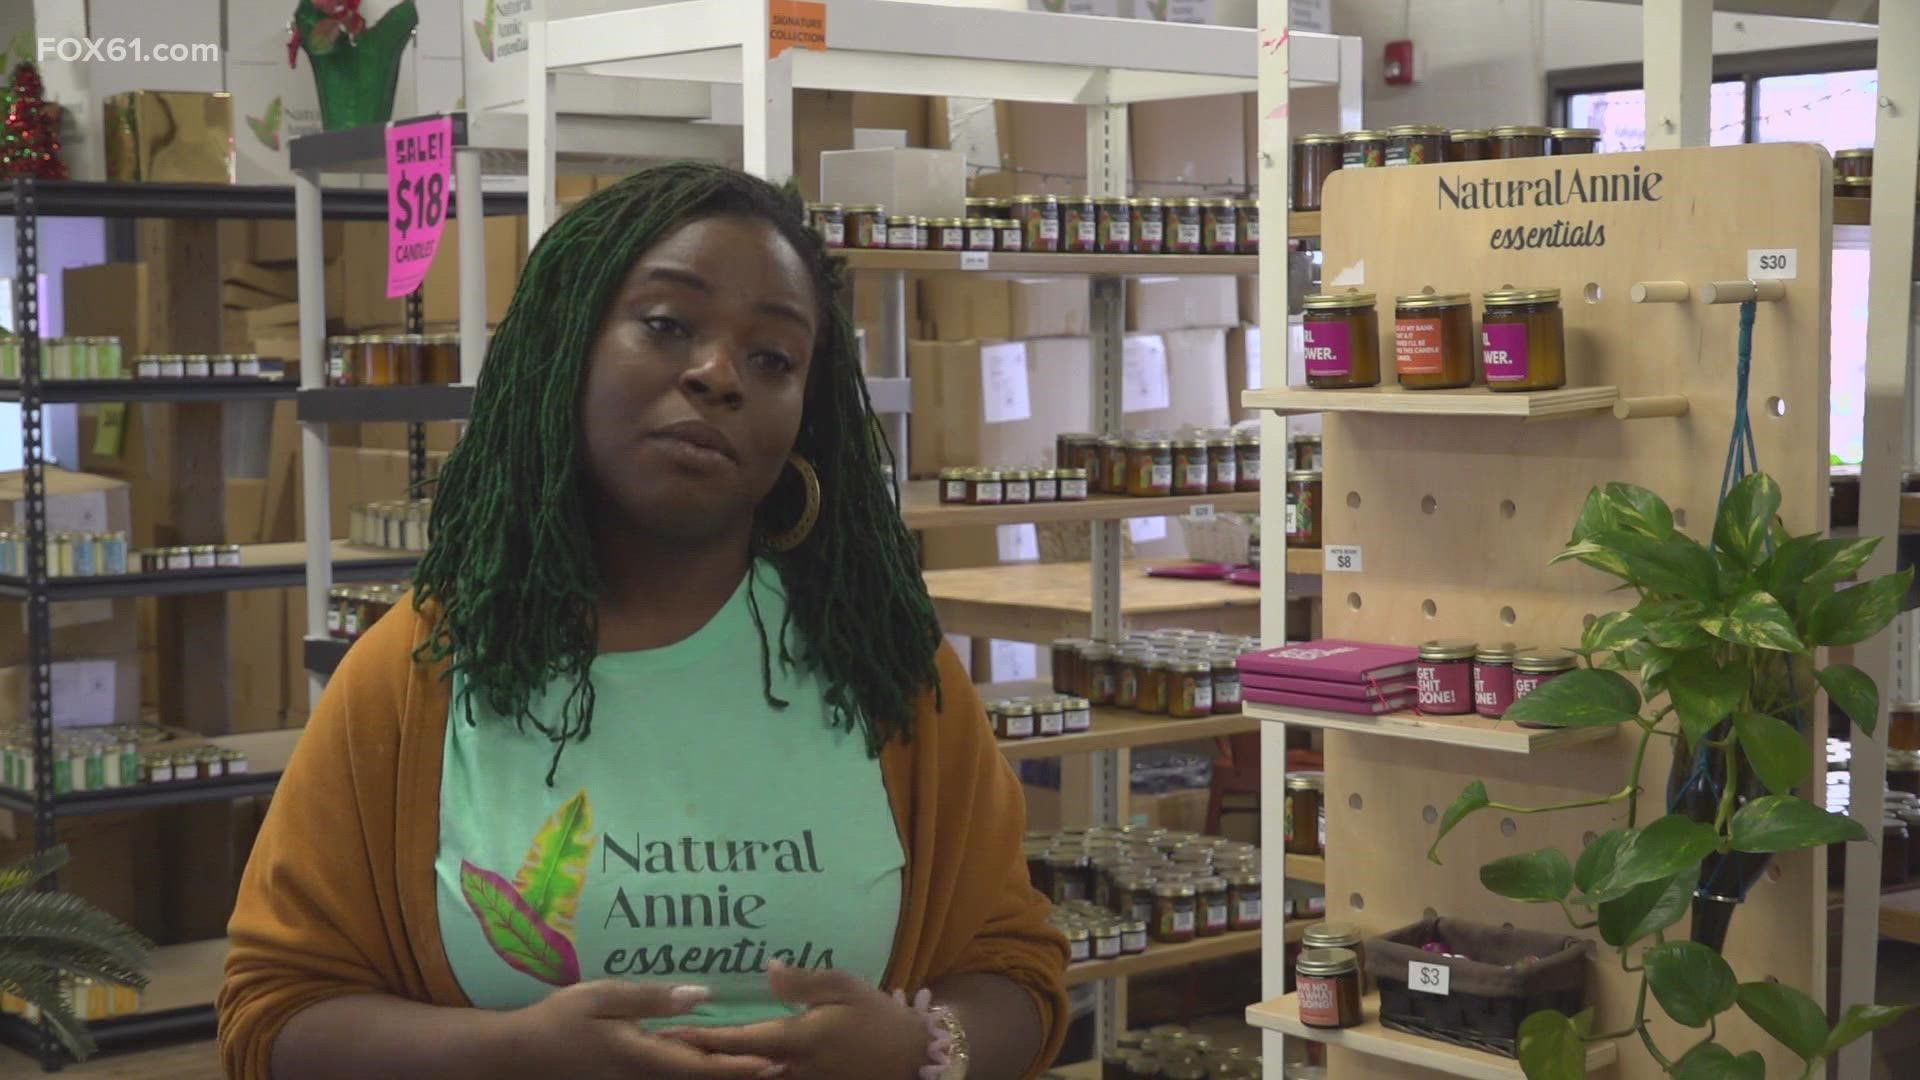 Between the good scents and good vibes, Natural Annie Essentials in Bridgeport is all about creating experiences for customers in search of soy candles.